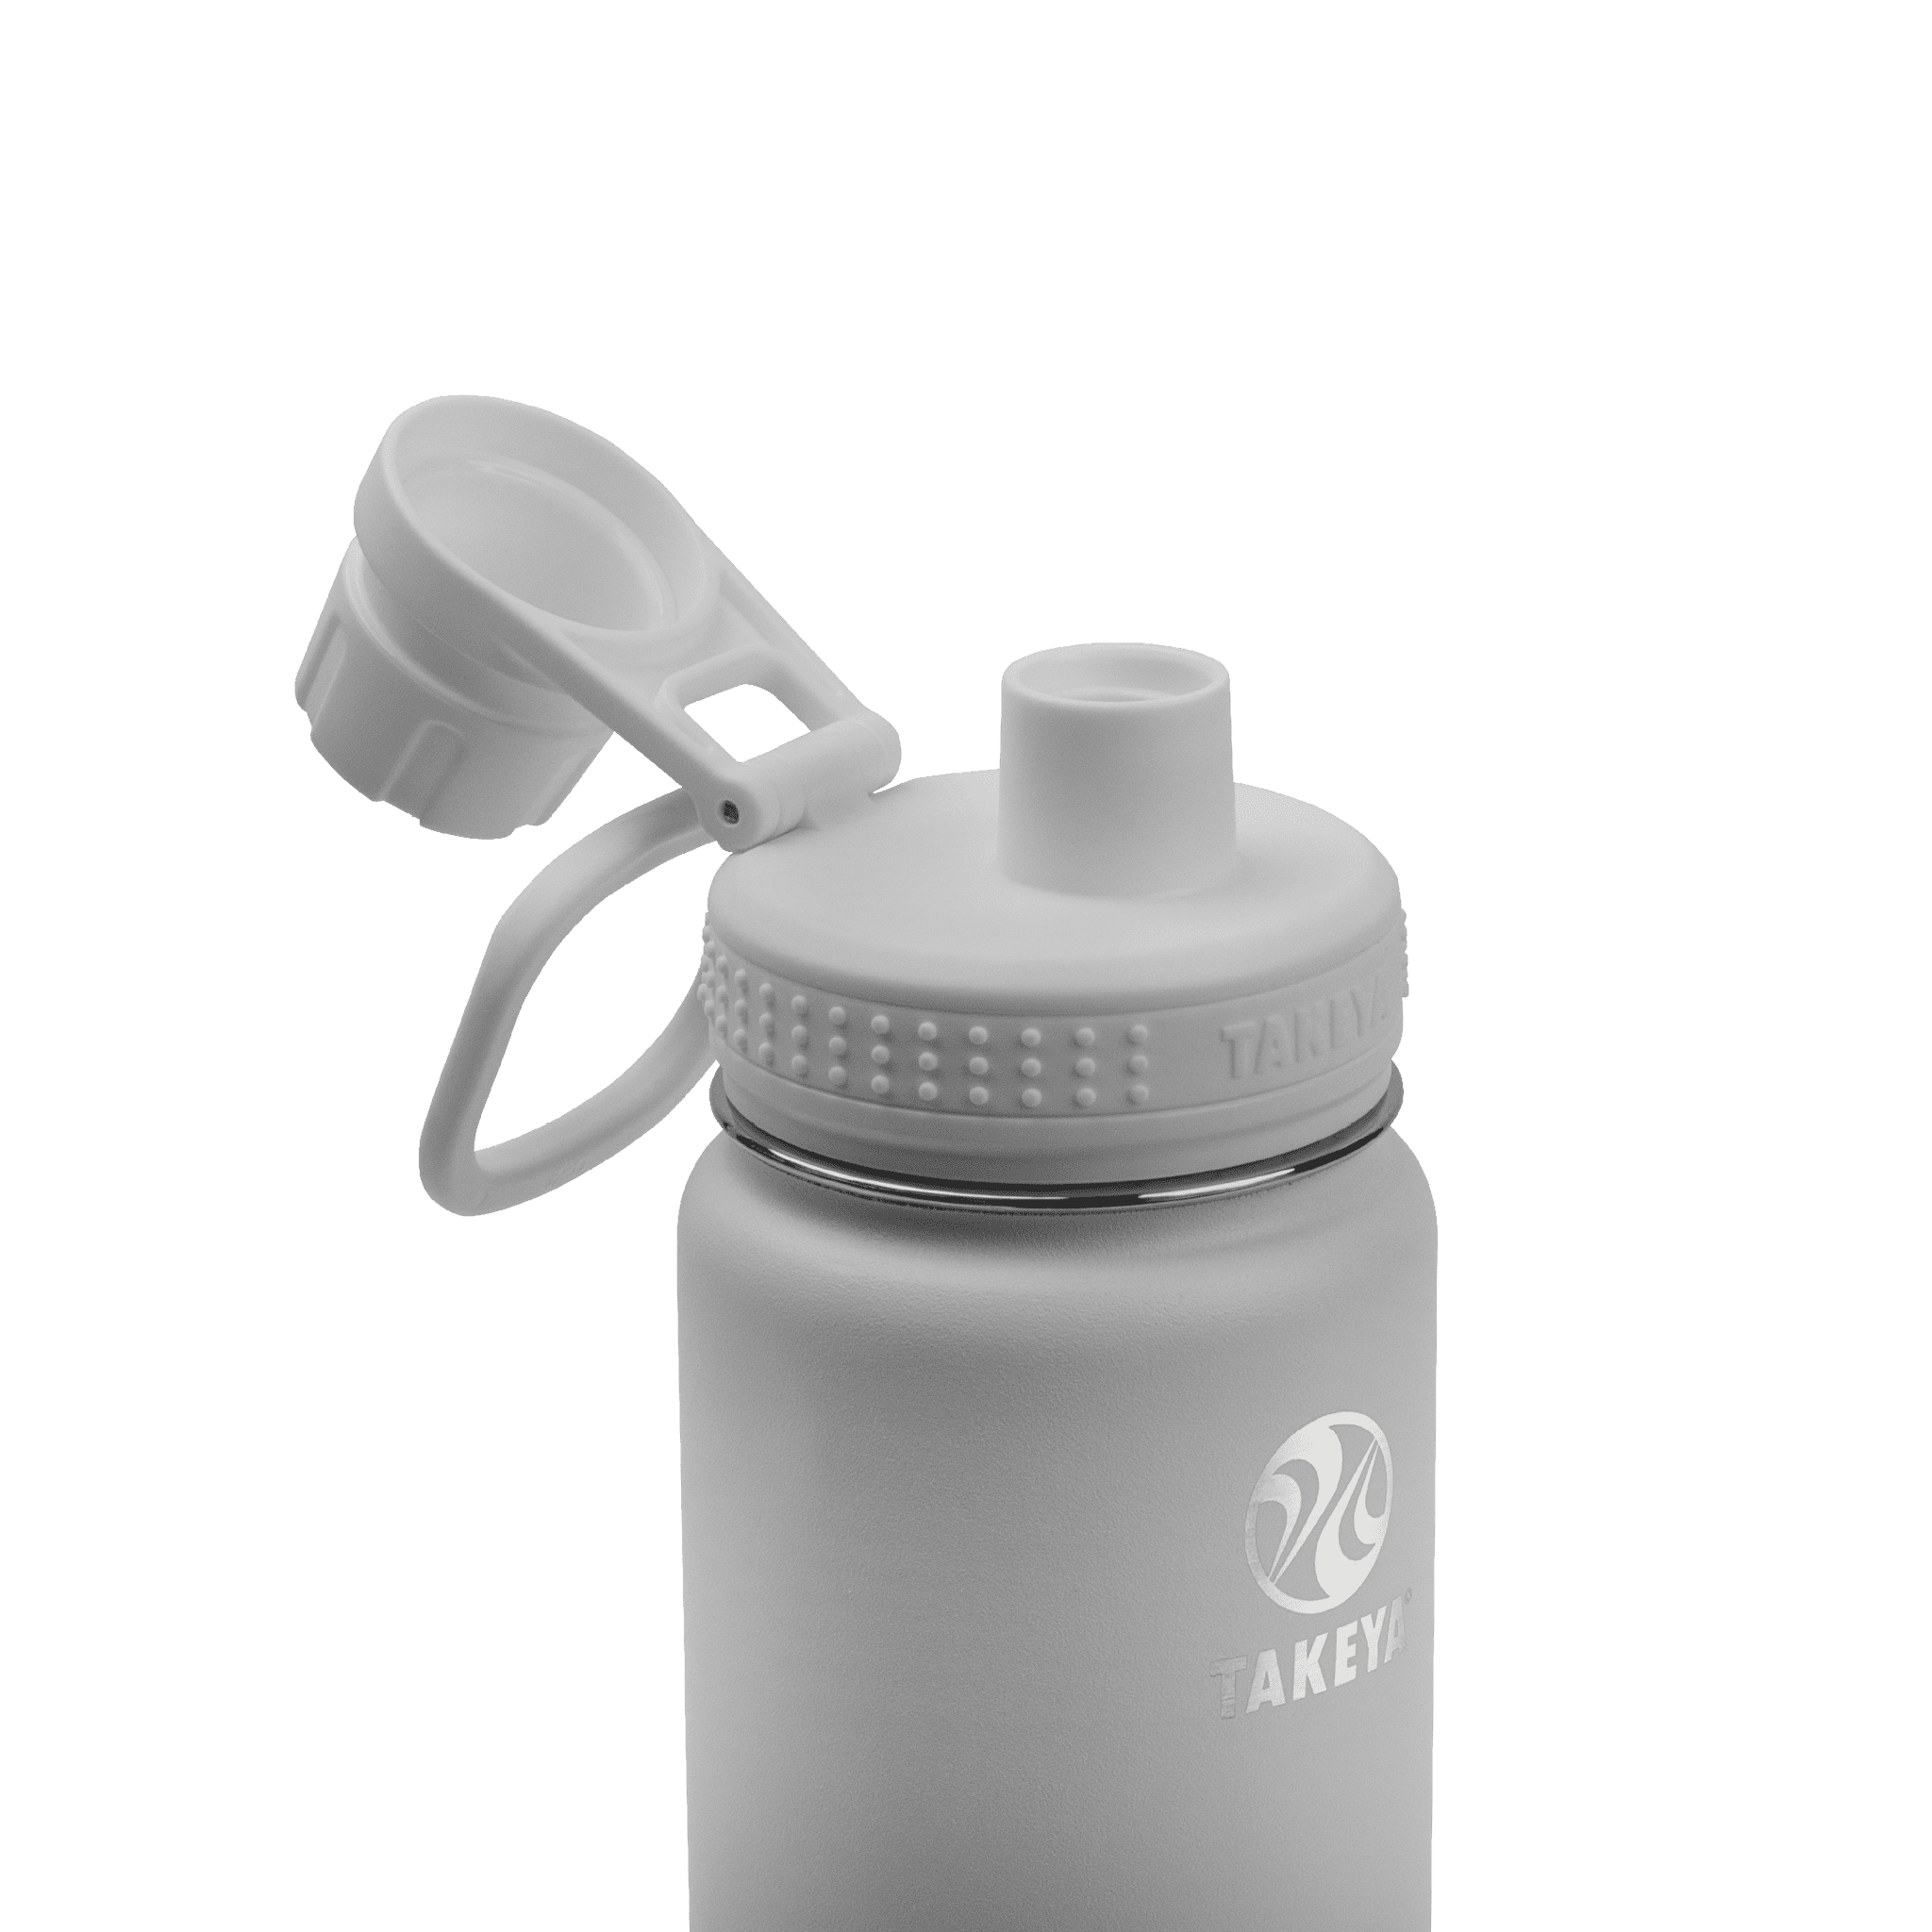 Takeya 40 oz. Vacuum-Insulated Water Bottle — Tools and Toys